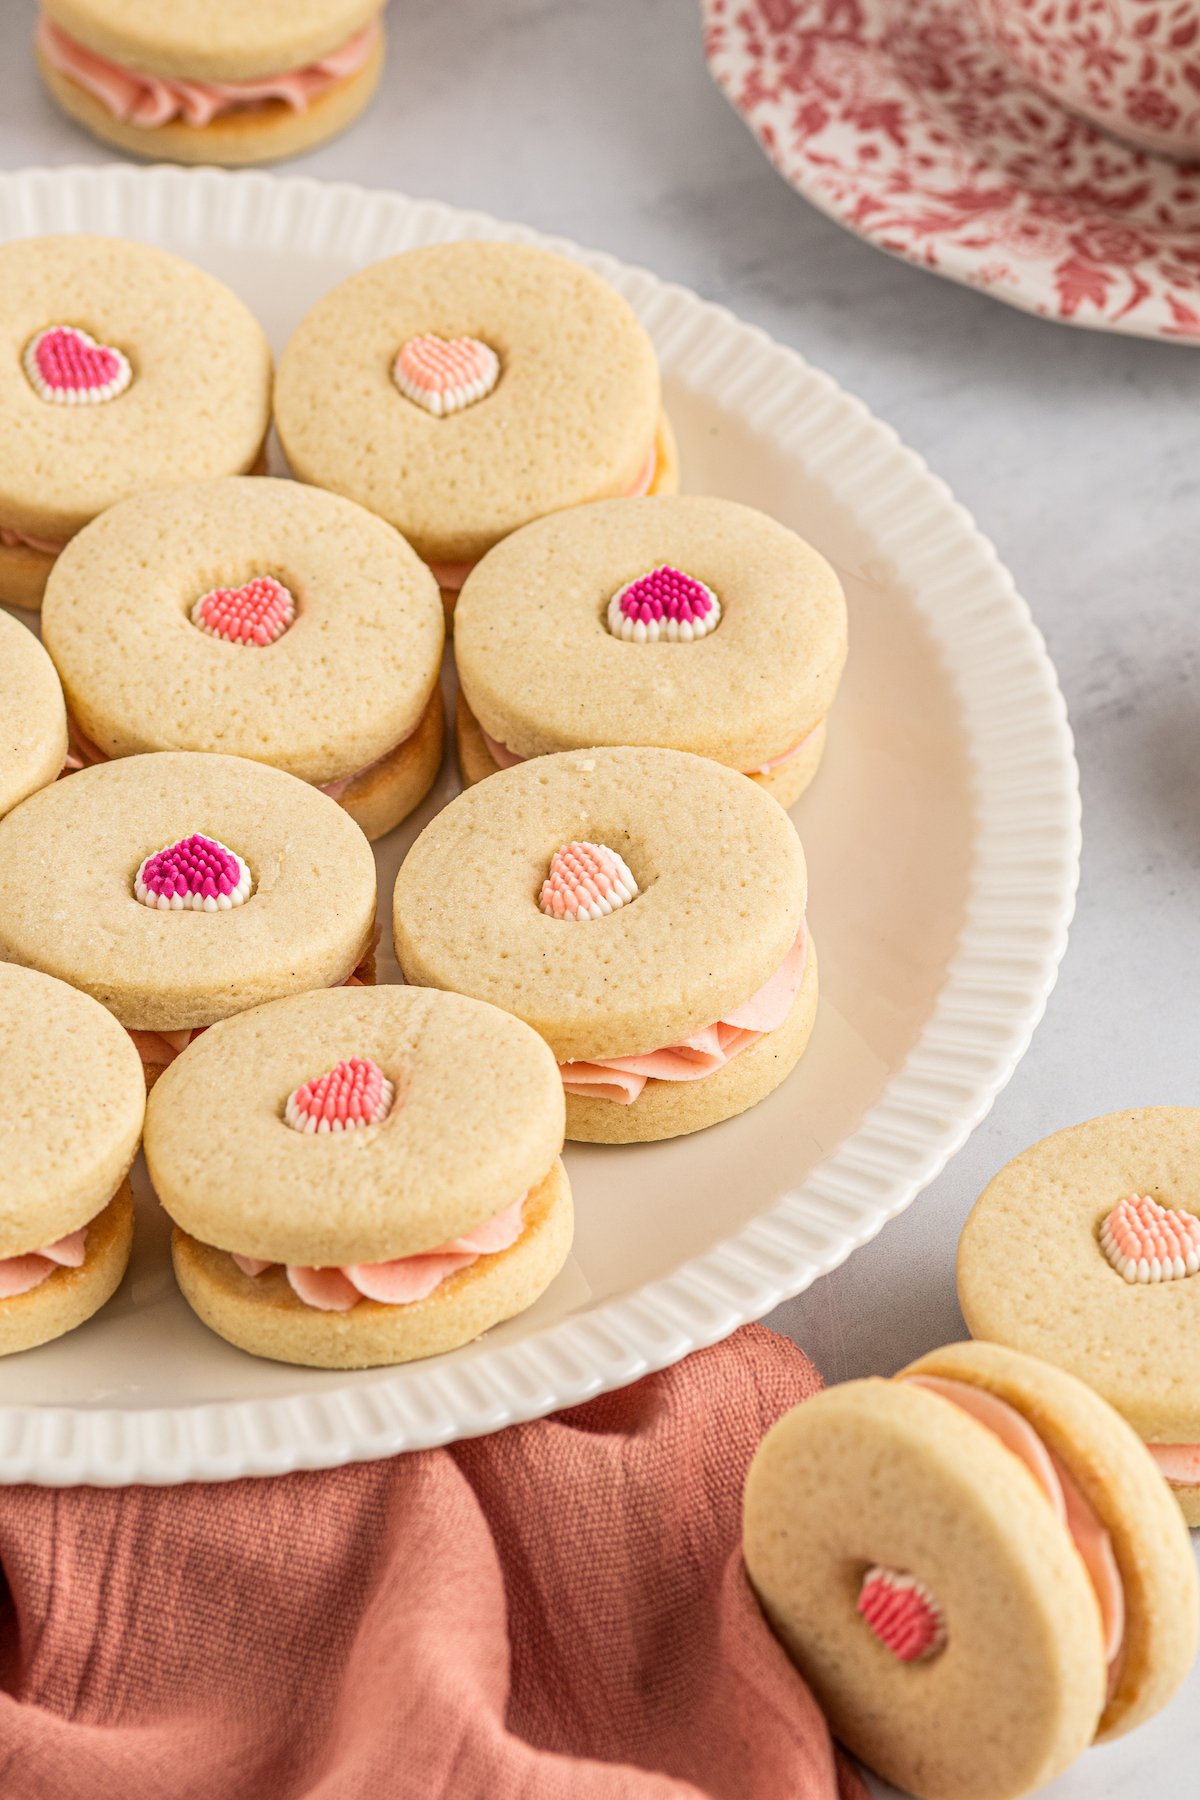 A platter with cookies on it. The cookies are decorated with candy hearts. Some of the hearts are dark pink, some are medium pink, and some are pale pink.